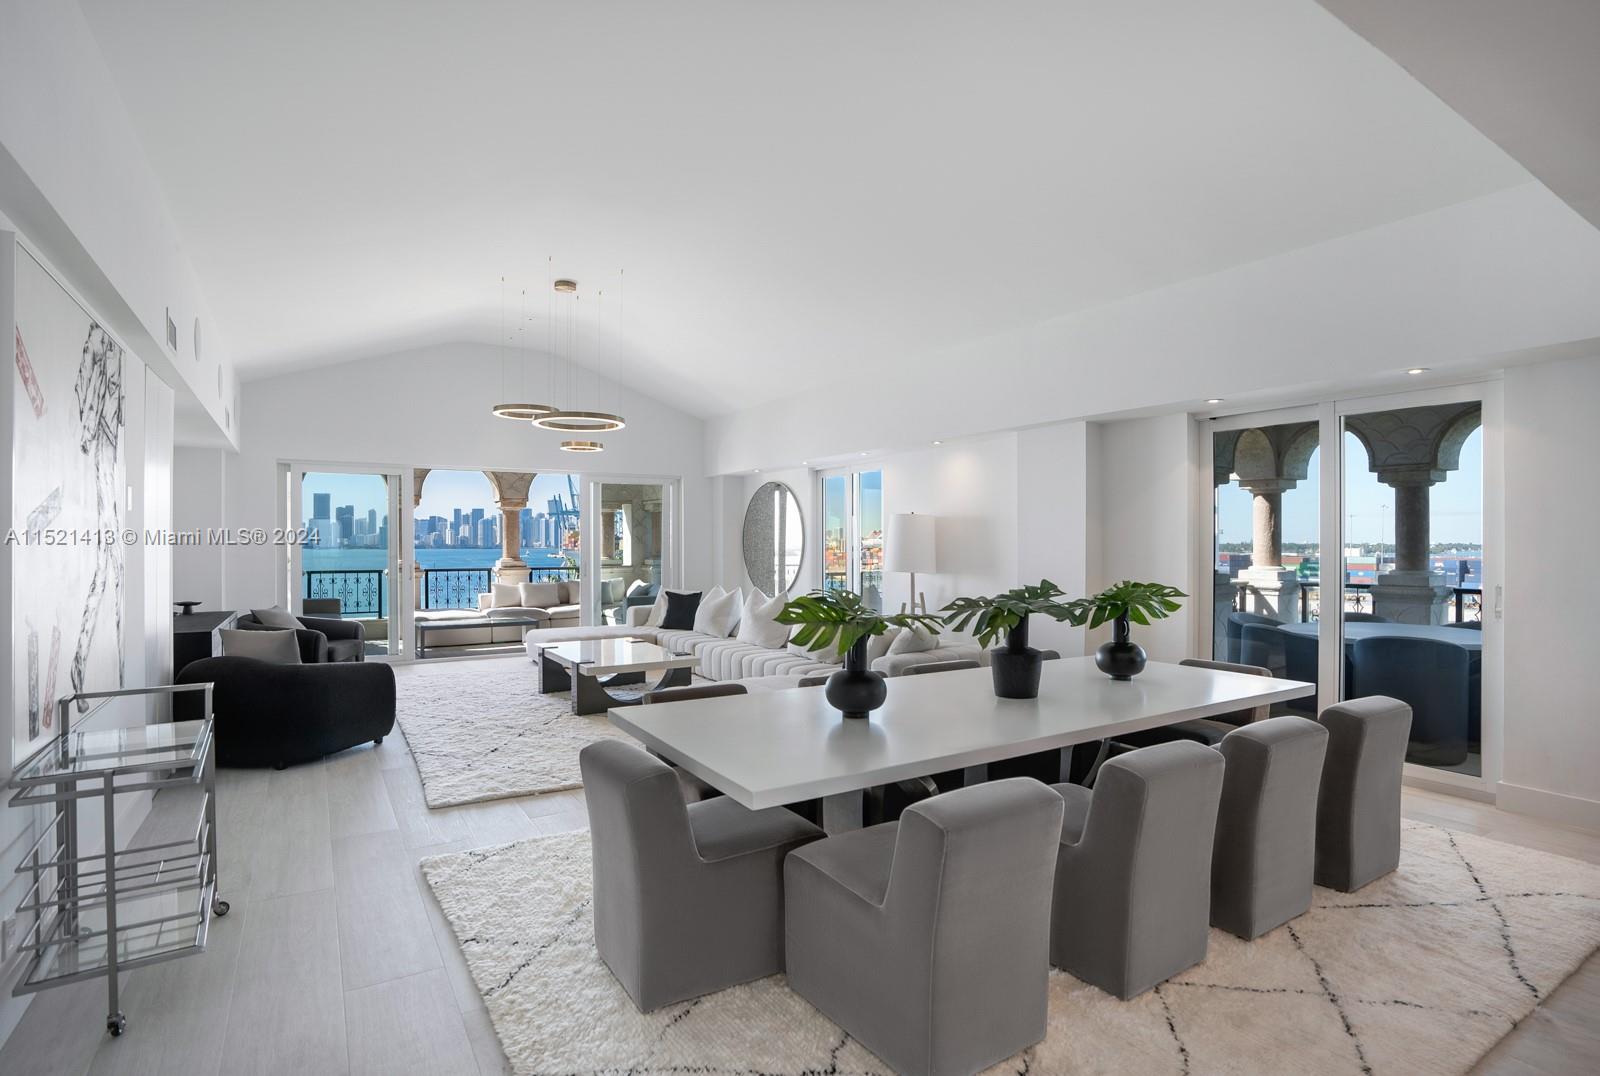 Magnificent Bayview corner unit at private Fisher Island. Beautiful, newly renovated and furnished residence featuring 3bed/3.5baths, state-of-the-art chef's kitchen with top-of-the-line appliances and adjacent breakfast area, wrap around terraces and much more. Exquisite stone and marble used through out. Only unit with extra high vaulted ceilings. Unobstructed direct bay and Downtown skyline views. Perfect to entertain and watch the sunset. Available May-December only. Live the Fisher Island lifestyle in an exceptional unit.